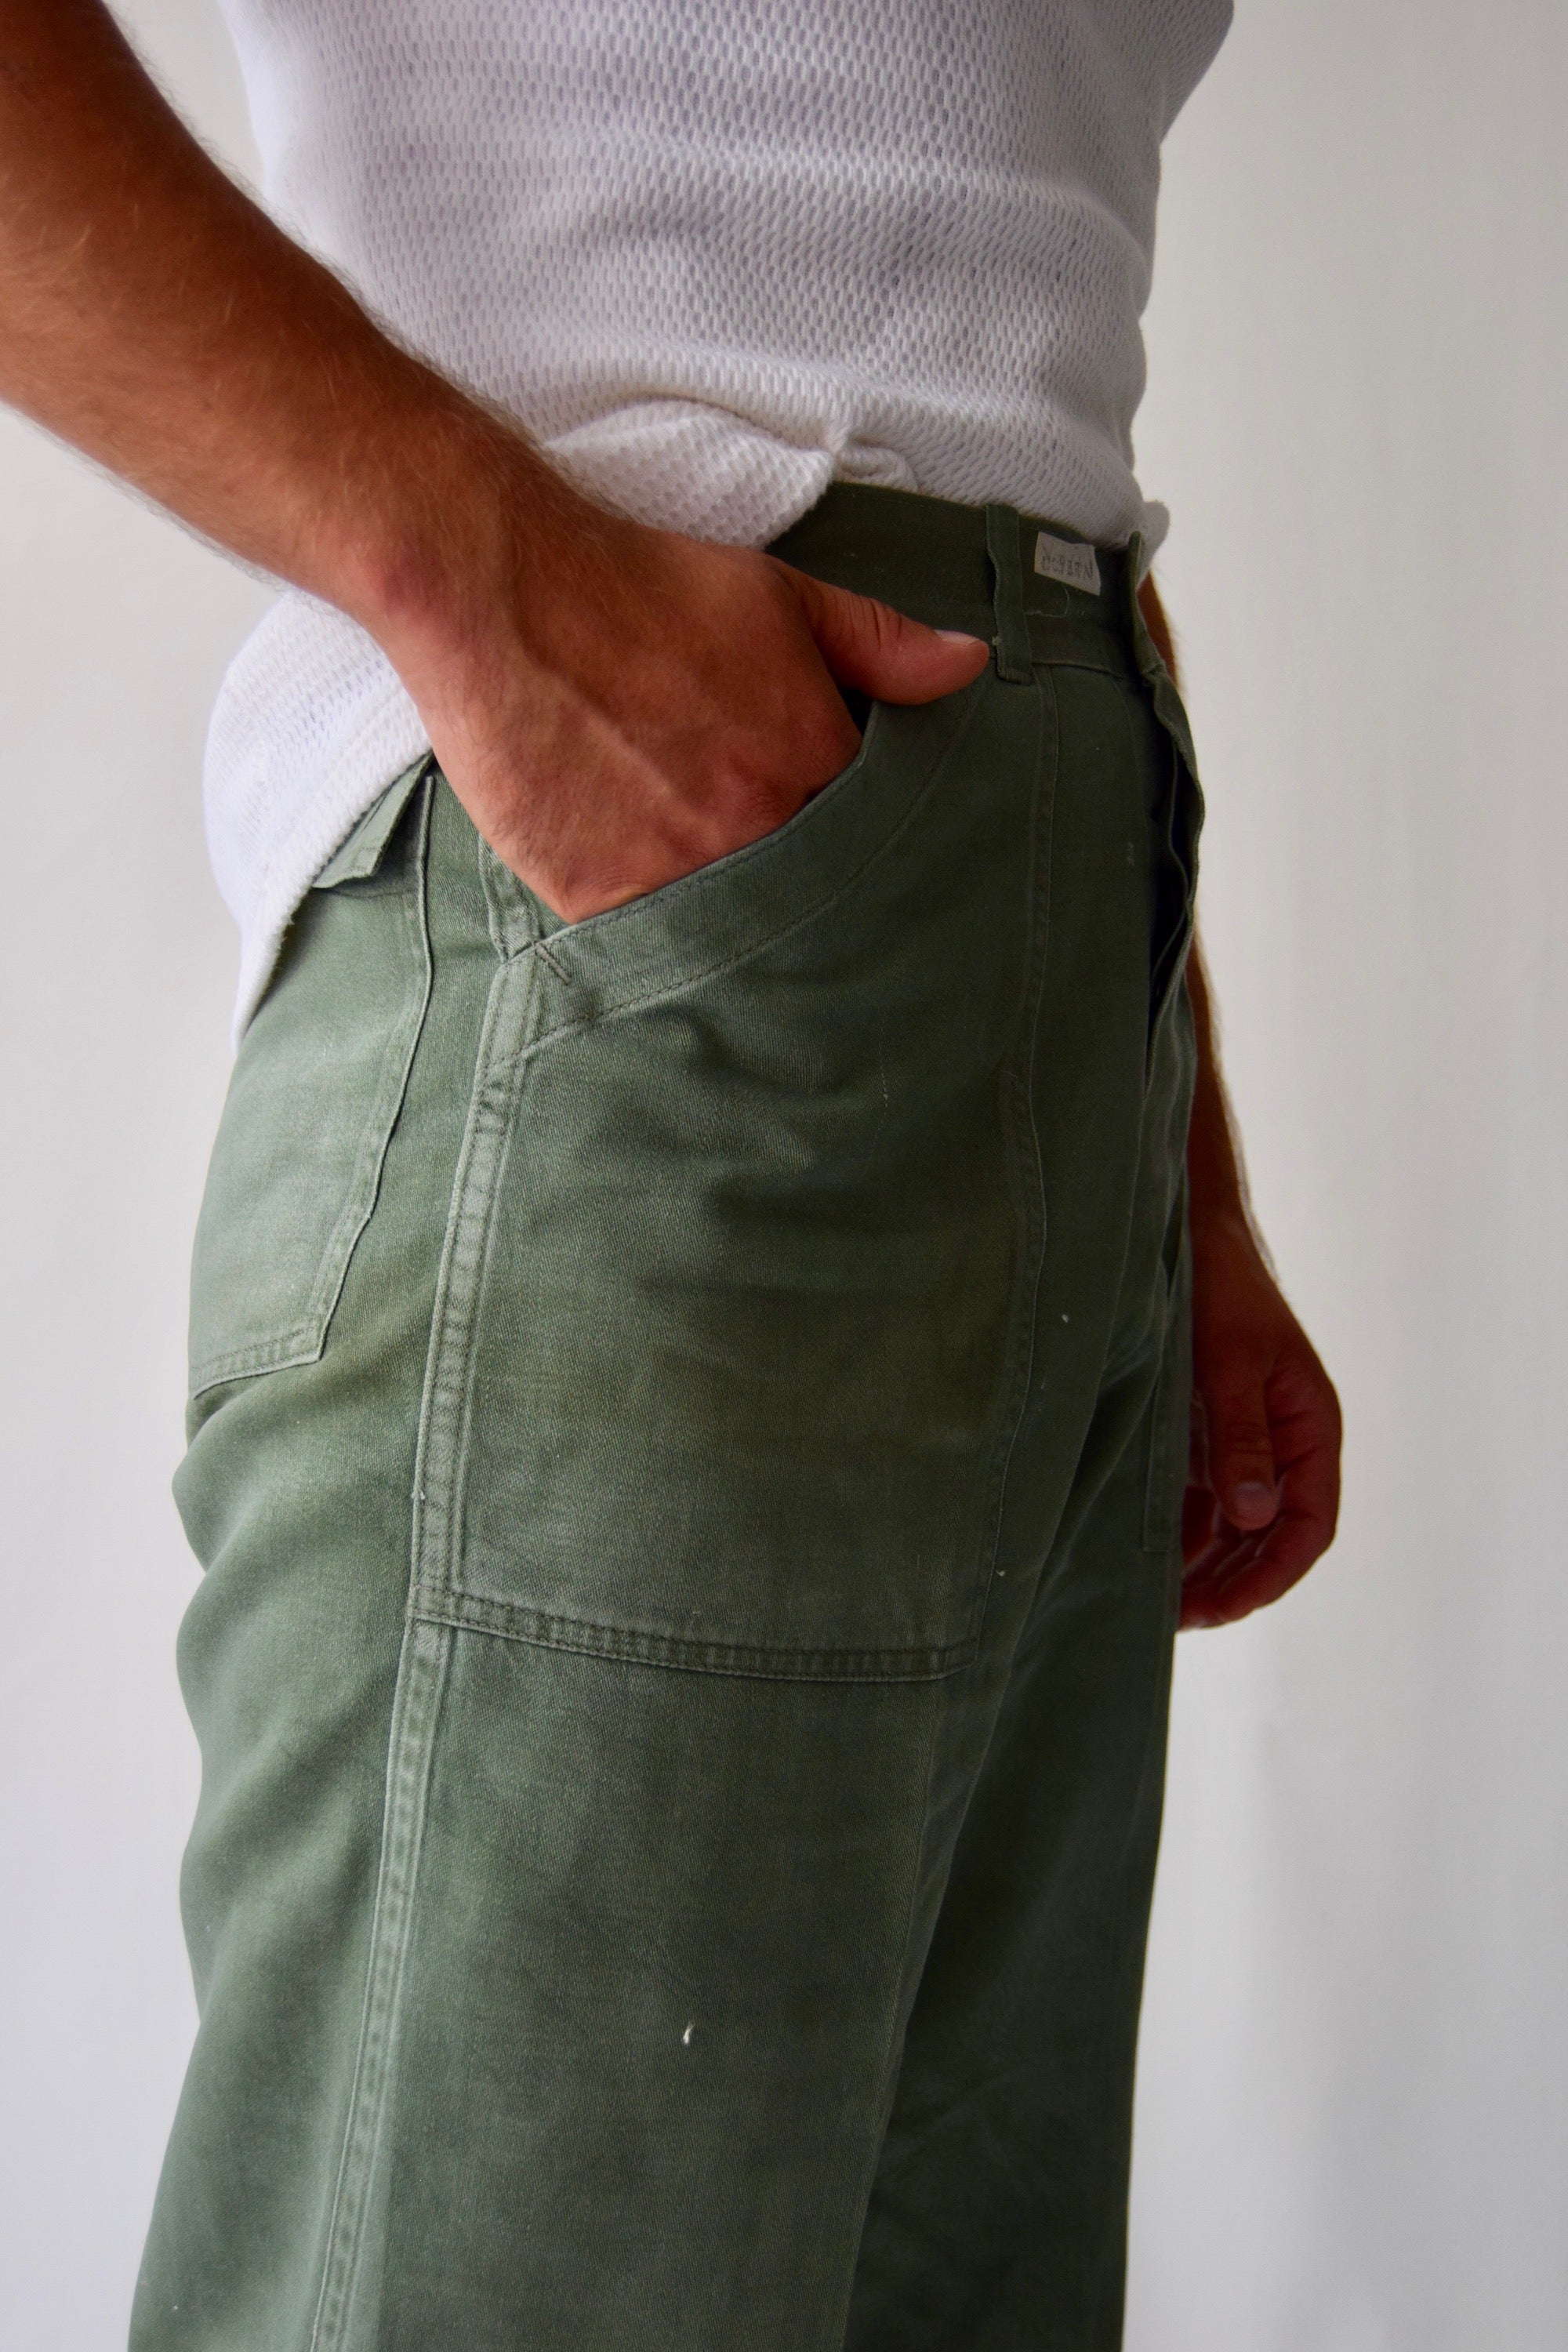 Men's 40's/50's Olive "Reeves" Trousers